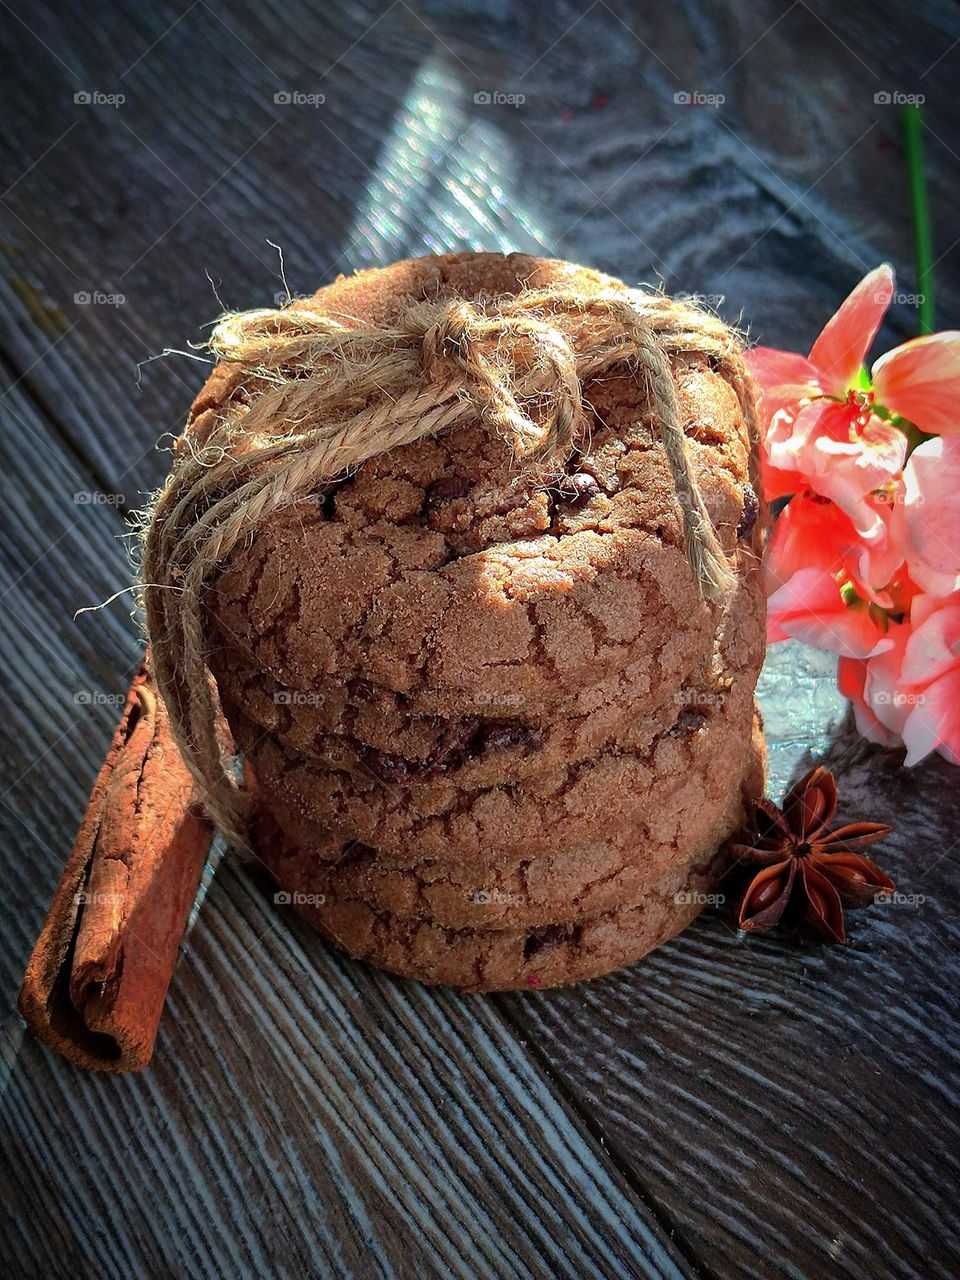 Chocolate chip cookies tied with gray twine.  Nearby, on a wooden background are: cinnamon stick, star anise fruit and pink geranium flowers.  A ray of the sun falls on objects, which gives contrast and energy.